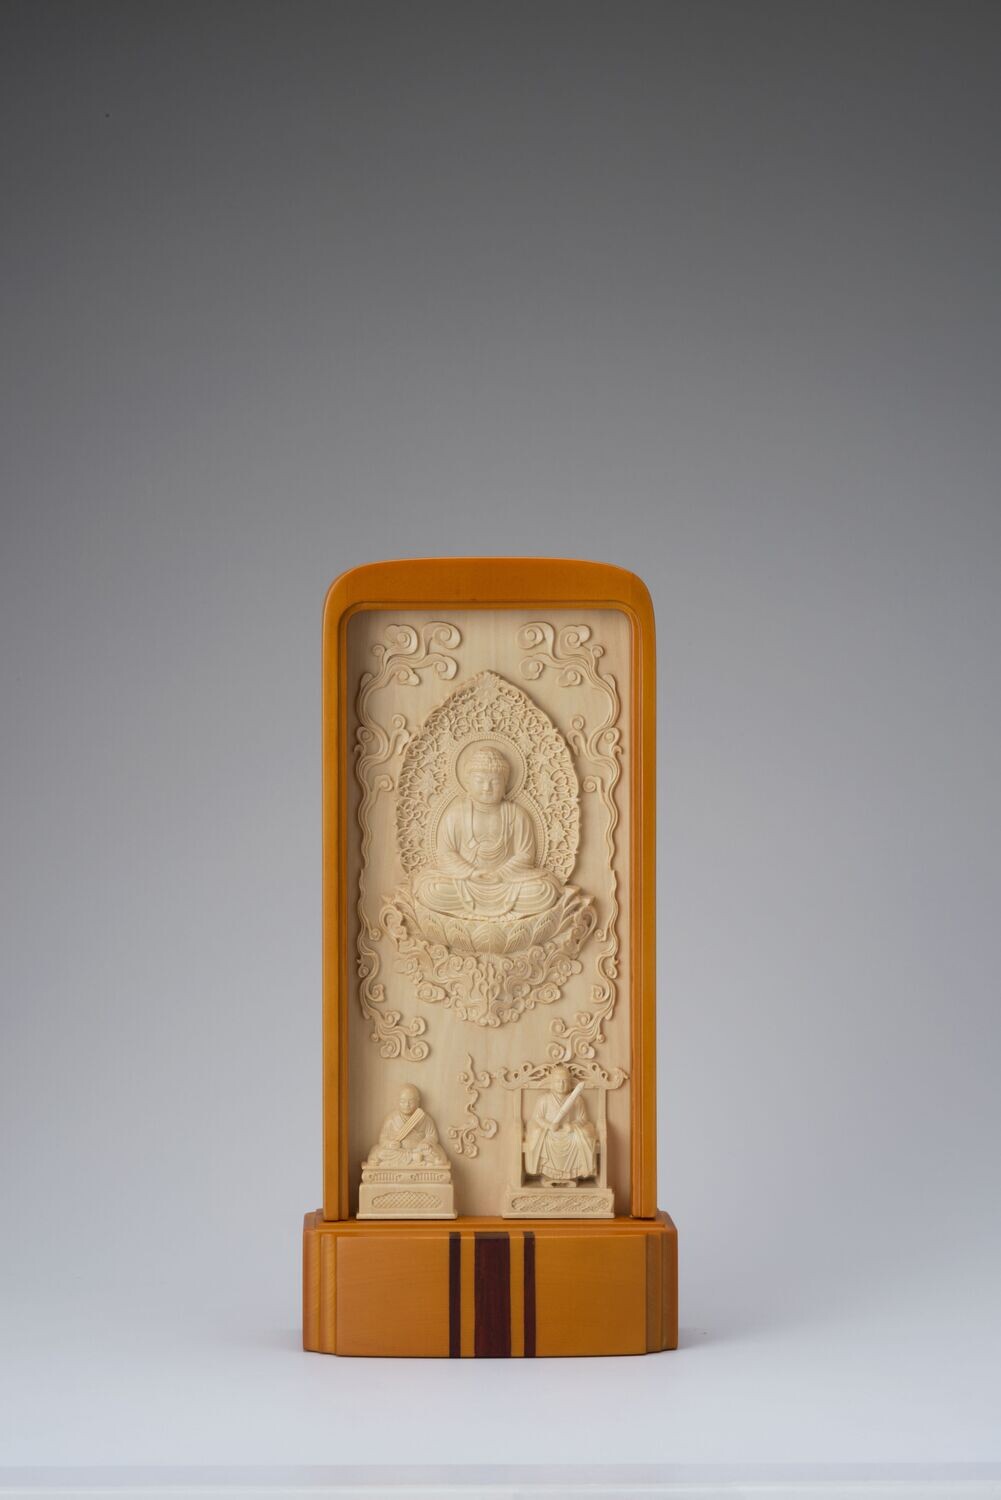 Rinzai Sect Stand Relief (臨済宗妙心寺派)